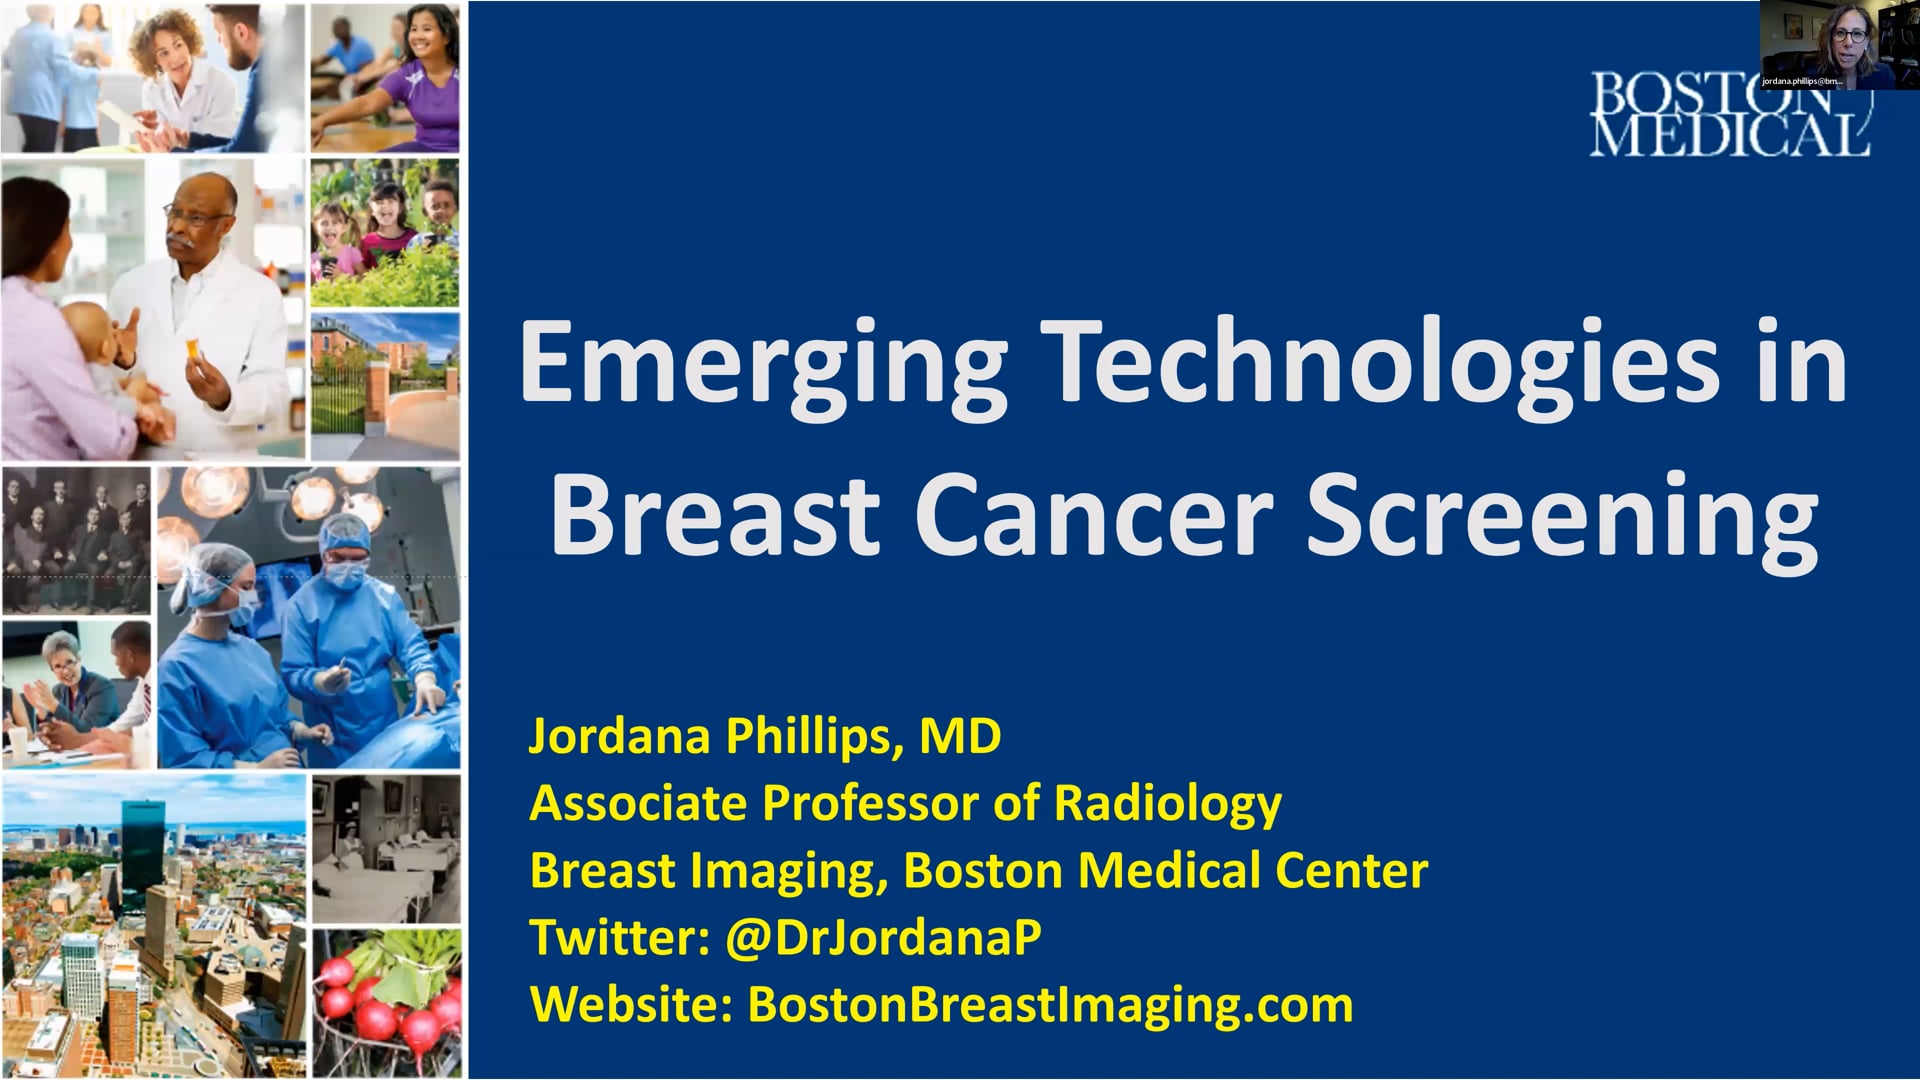 "Emerging Technologies in Breast Cancer Screening" - Right Breast Cancer Screening for You